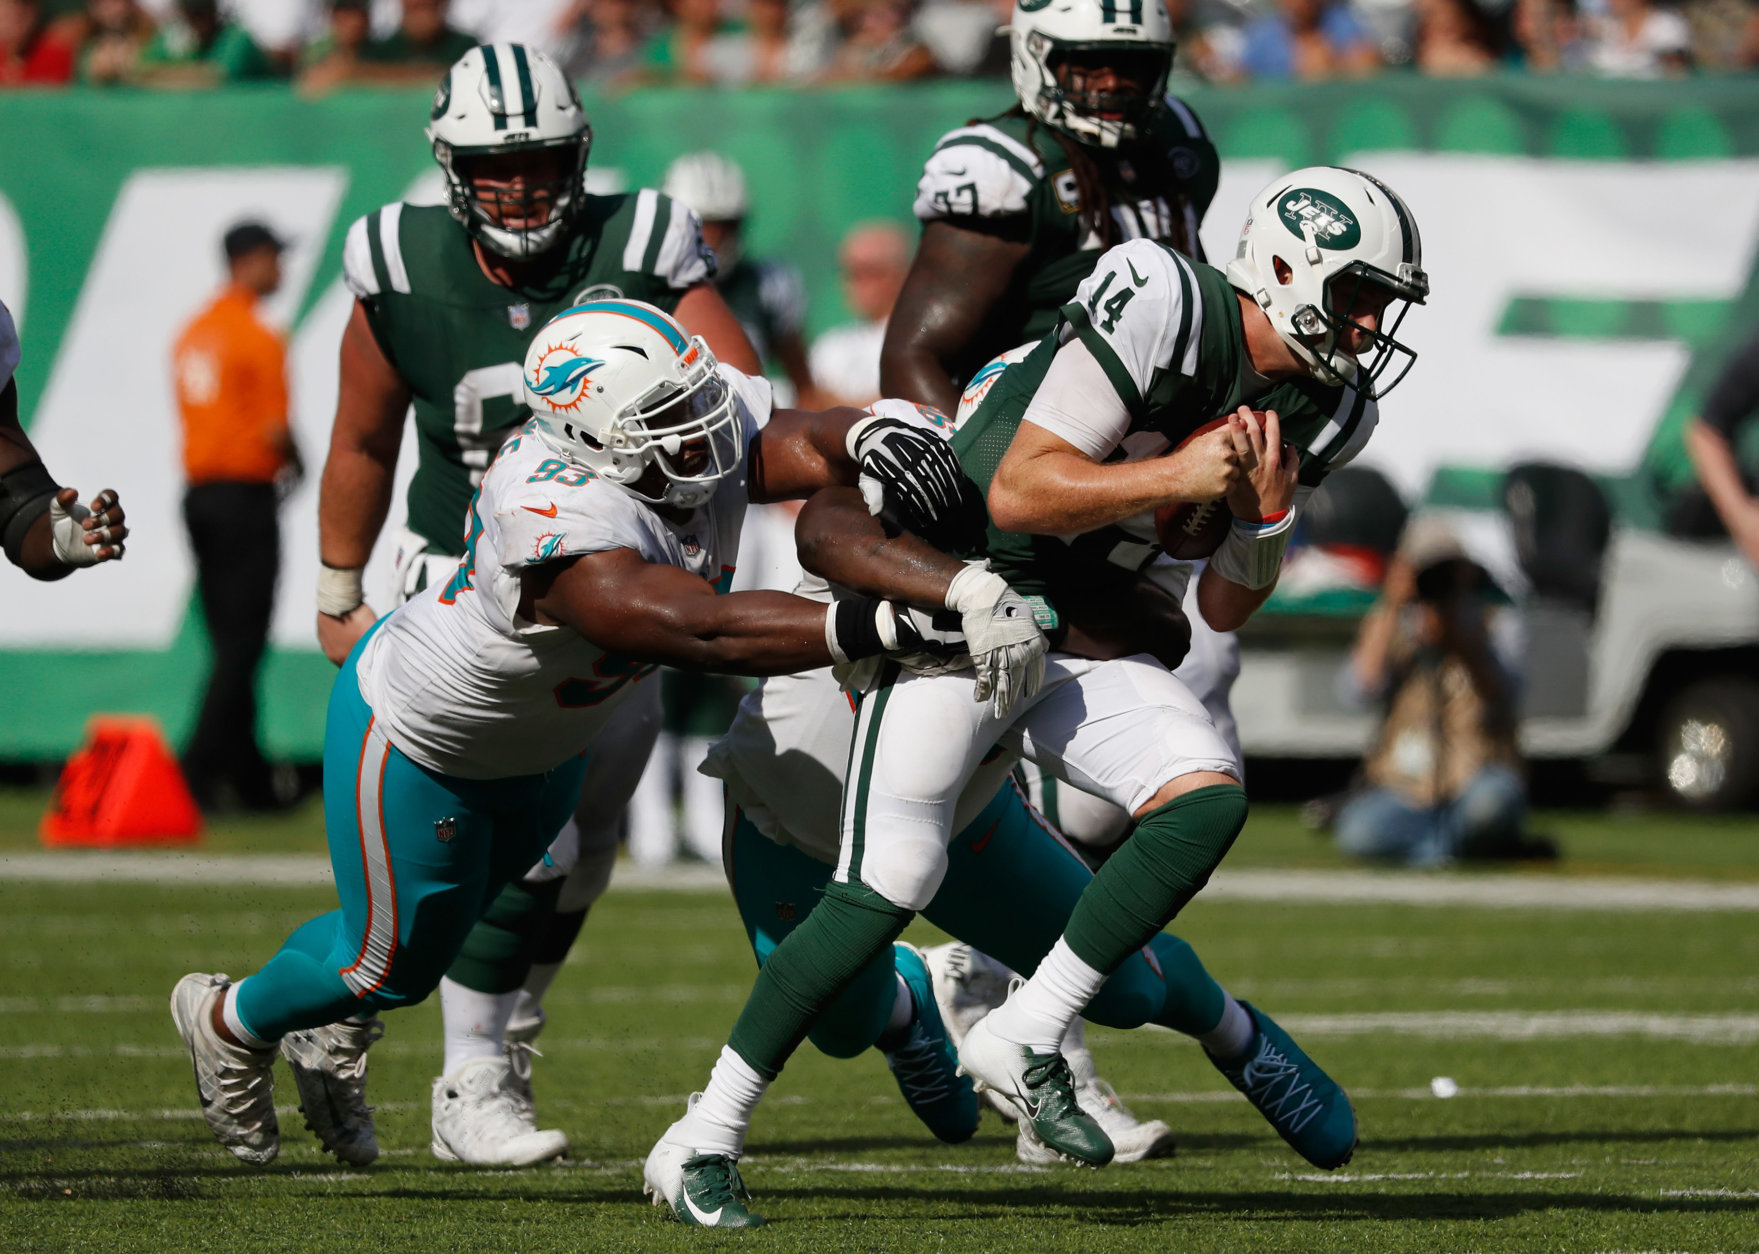 EAST RUTHERFORD, NJ - SEPTEMBER 16:  Quarterback Sam Darnold #14 of the New York Jets is tackled by defensive tackle Akeem Spence #93 and defensive tackle Vincent Taylor #96 of the Miami Dolphins during the second half at MetLife Stadium on September 16, 2018 in East Rutherford, New Jersey.  (Photo by Michael Owens/Getty Images)